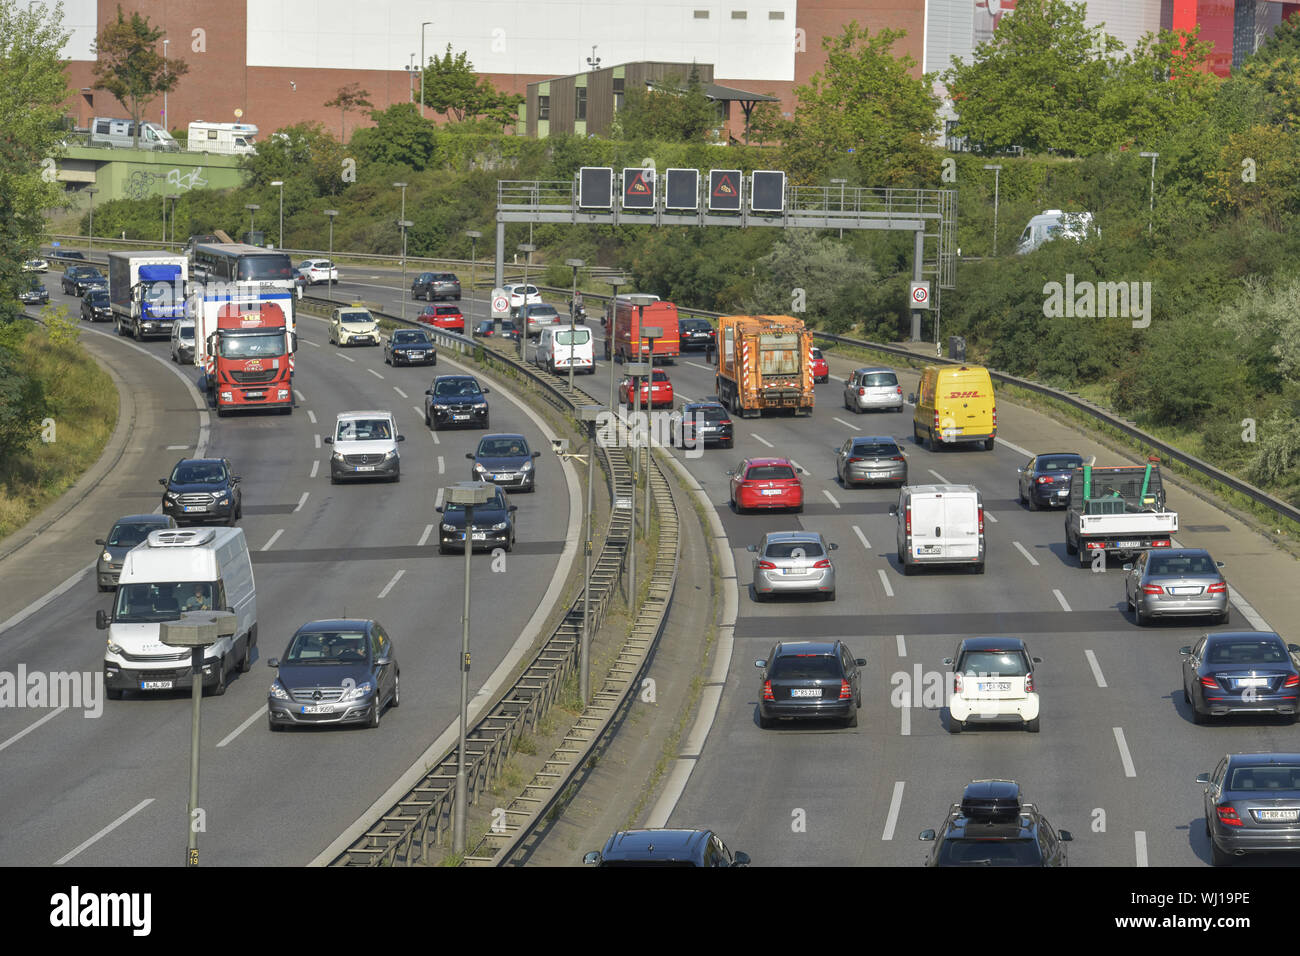 A 100, A100, car, highway, cars, motor traffic, Berlin, Germany, Saxon's dam, town highway, town ring, street, street, traffic, traffic, traffic, beau Stock Photo